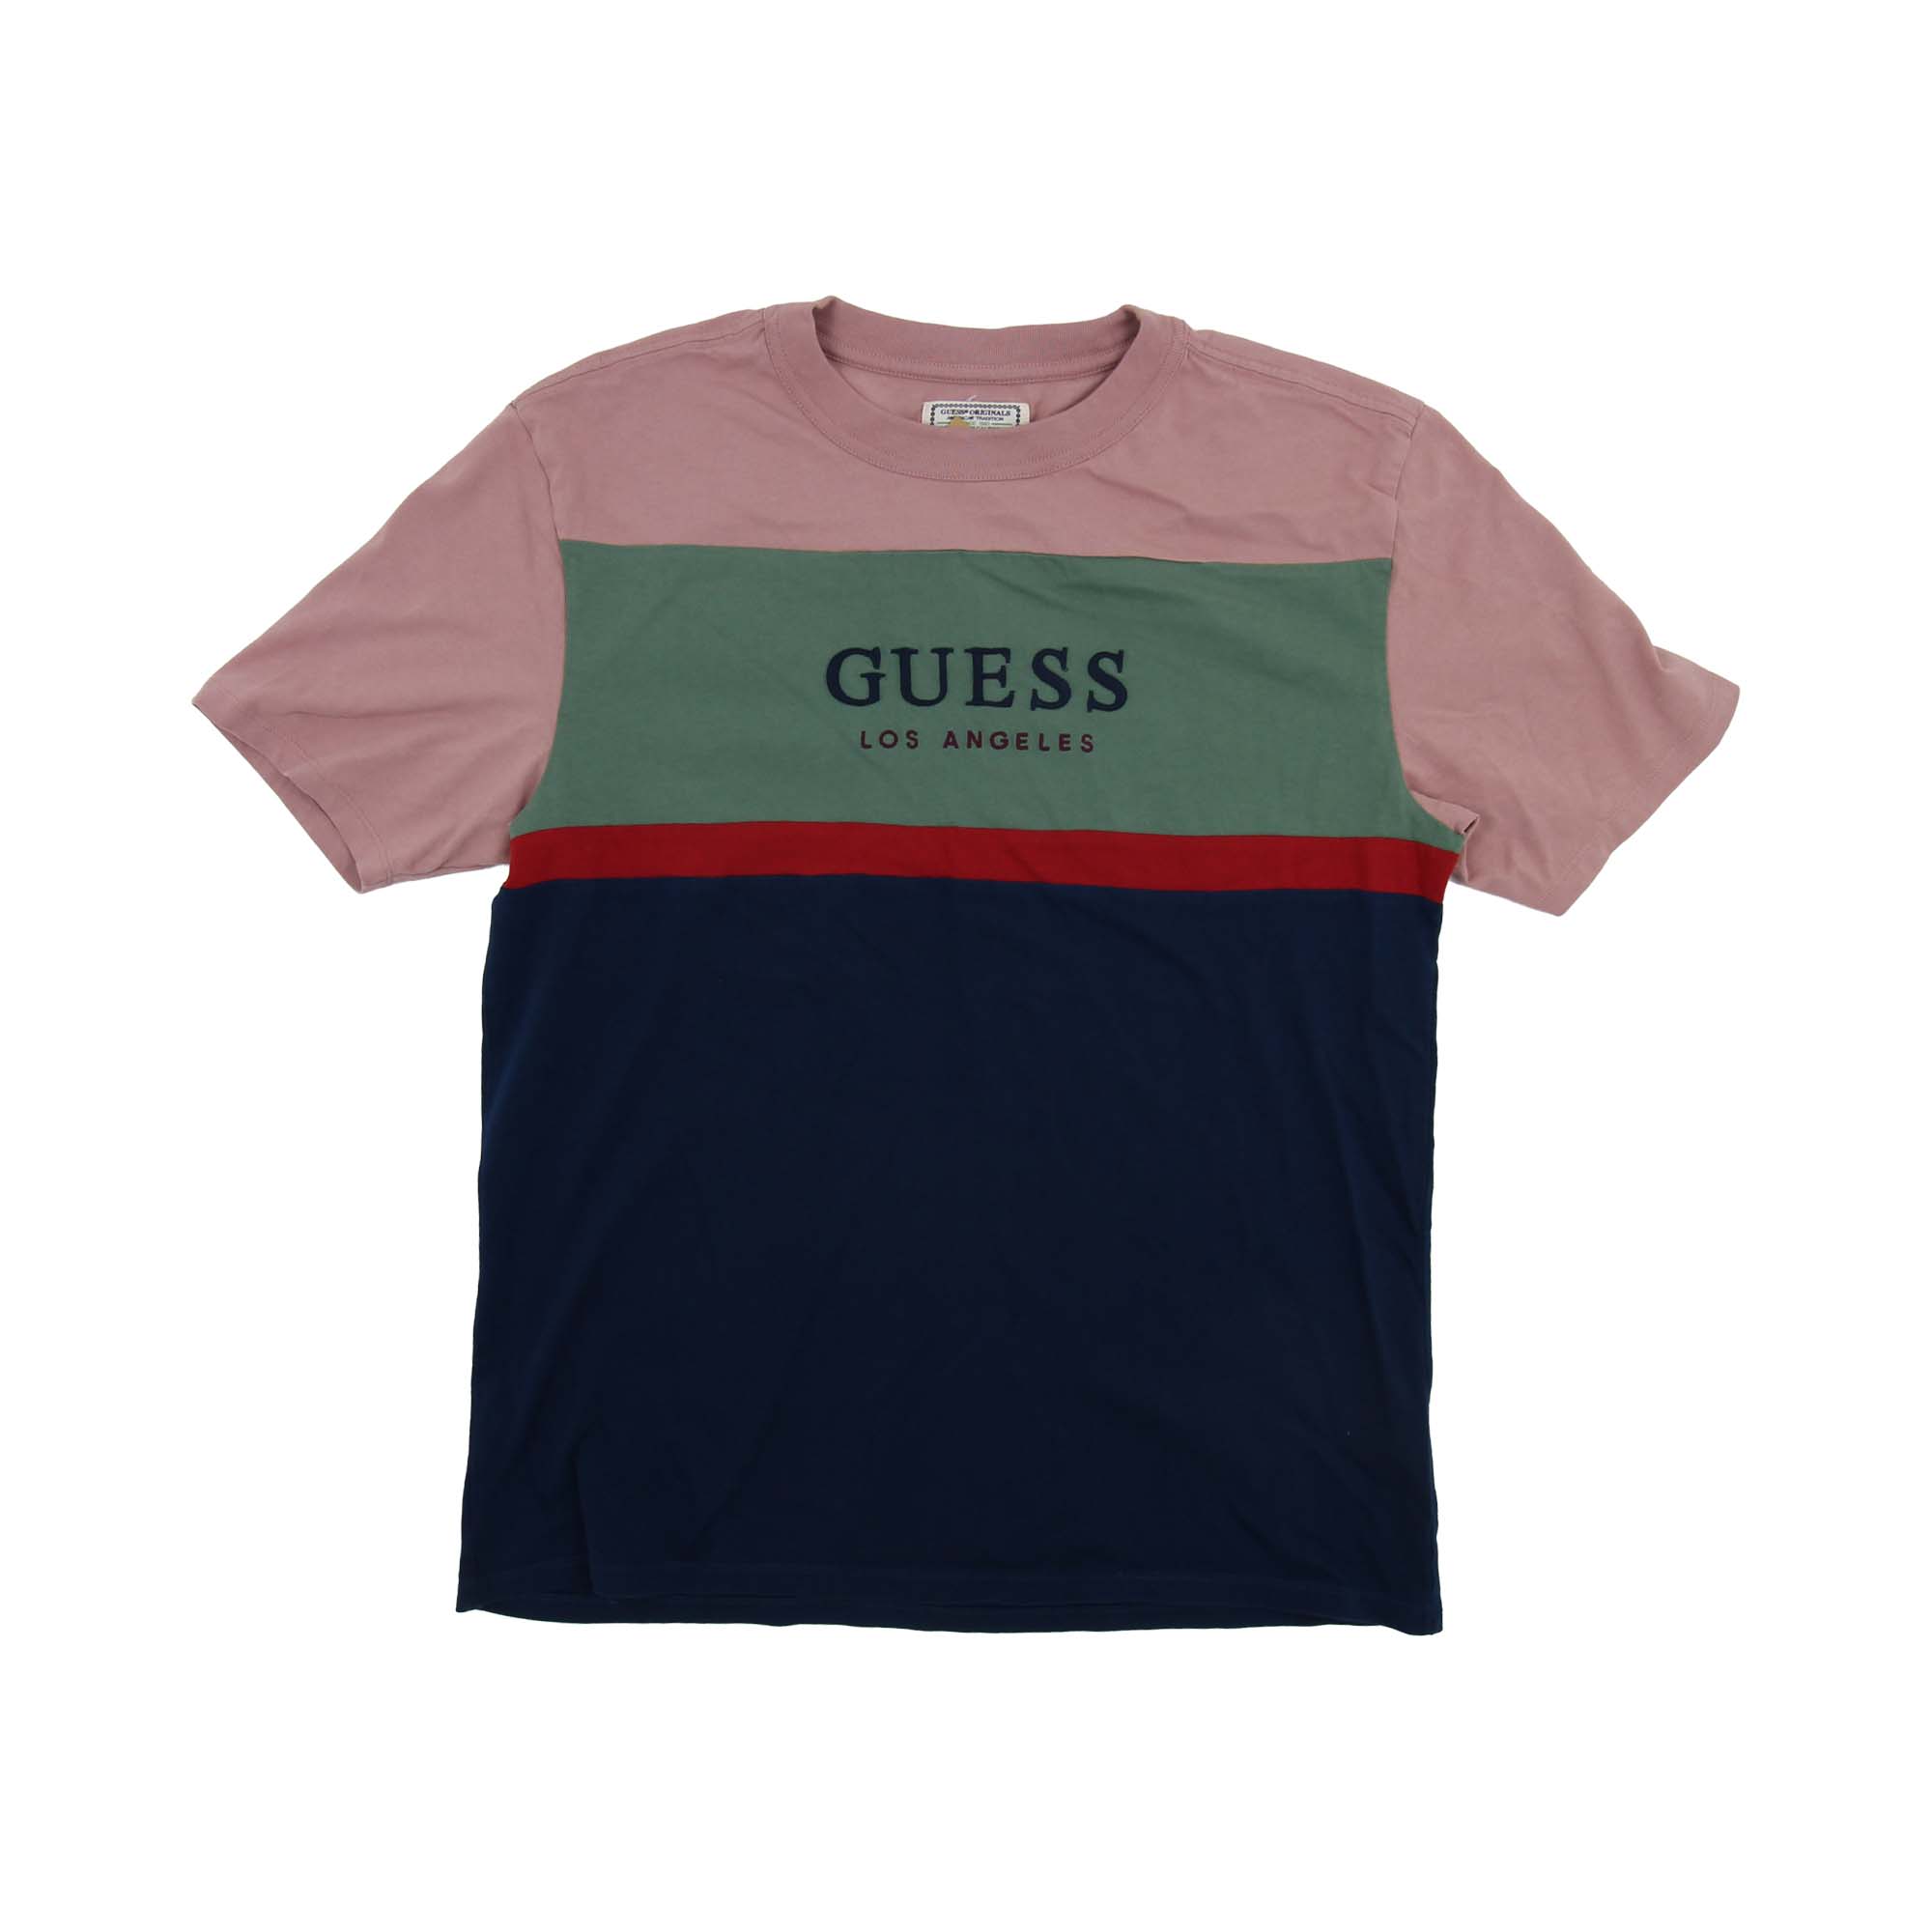 Guess Embroidered Logo T-Shirt - L